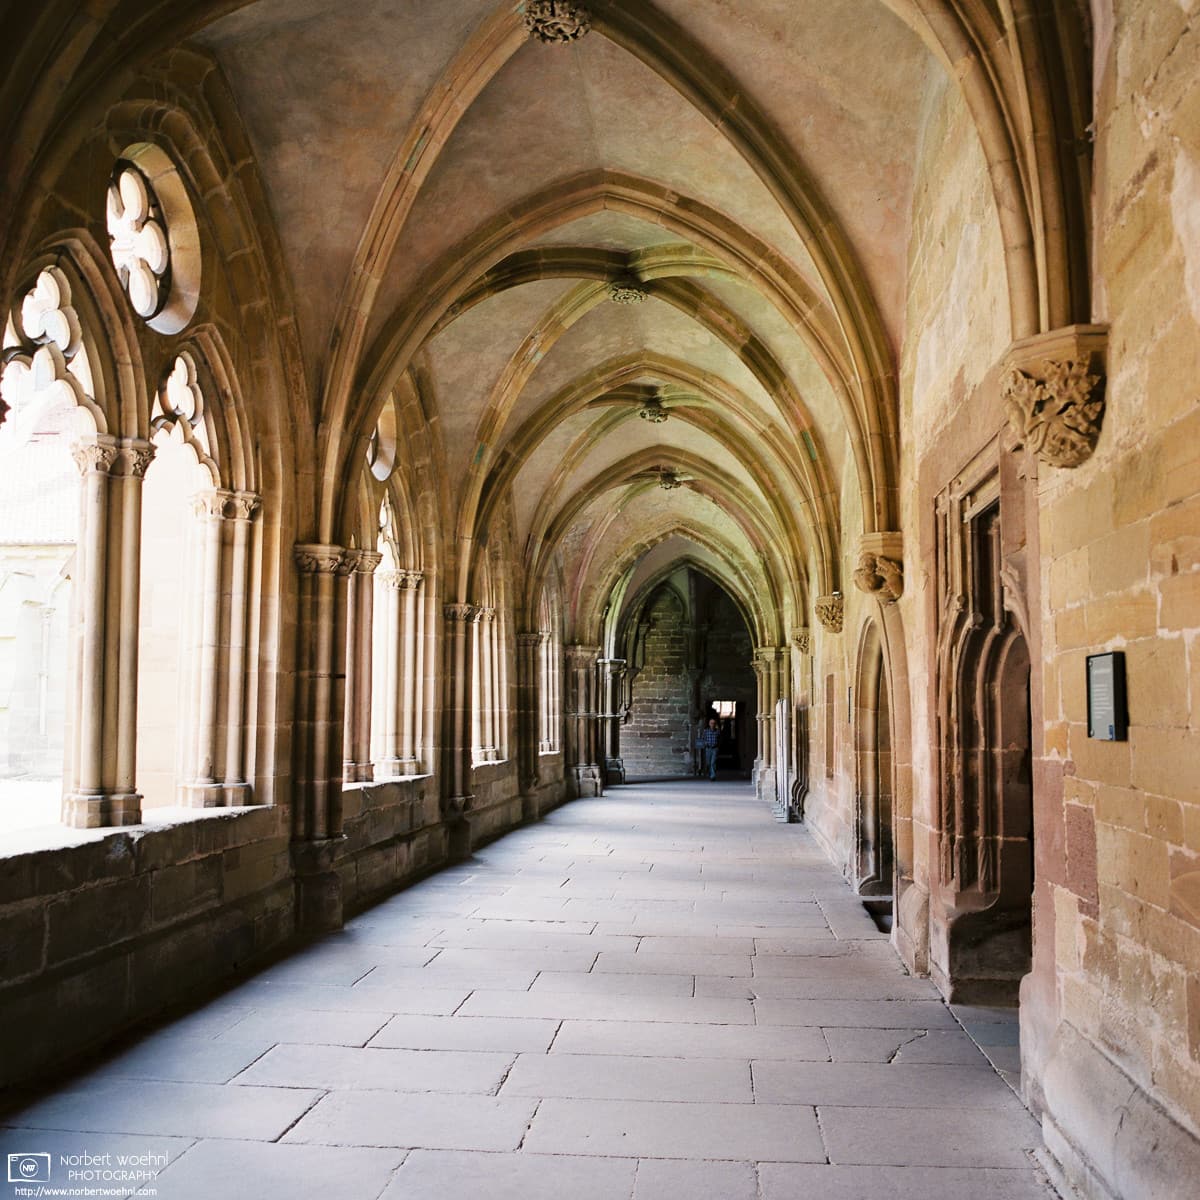 A view along the cloister at Maulbronn Monastery in southwestern Germany.